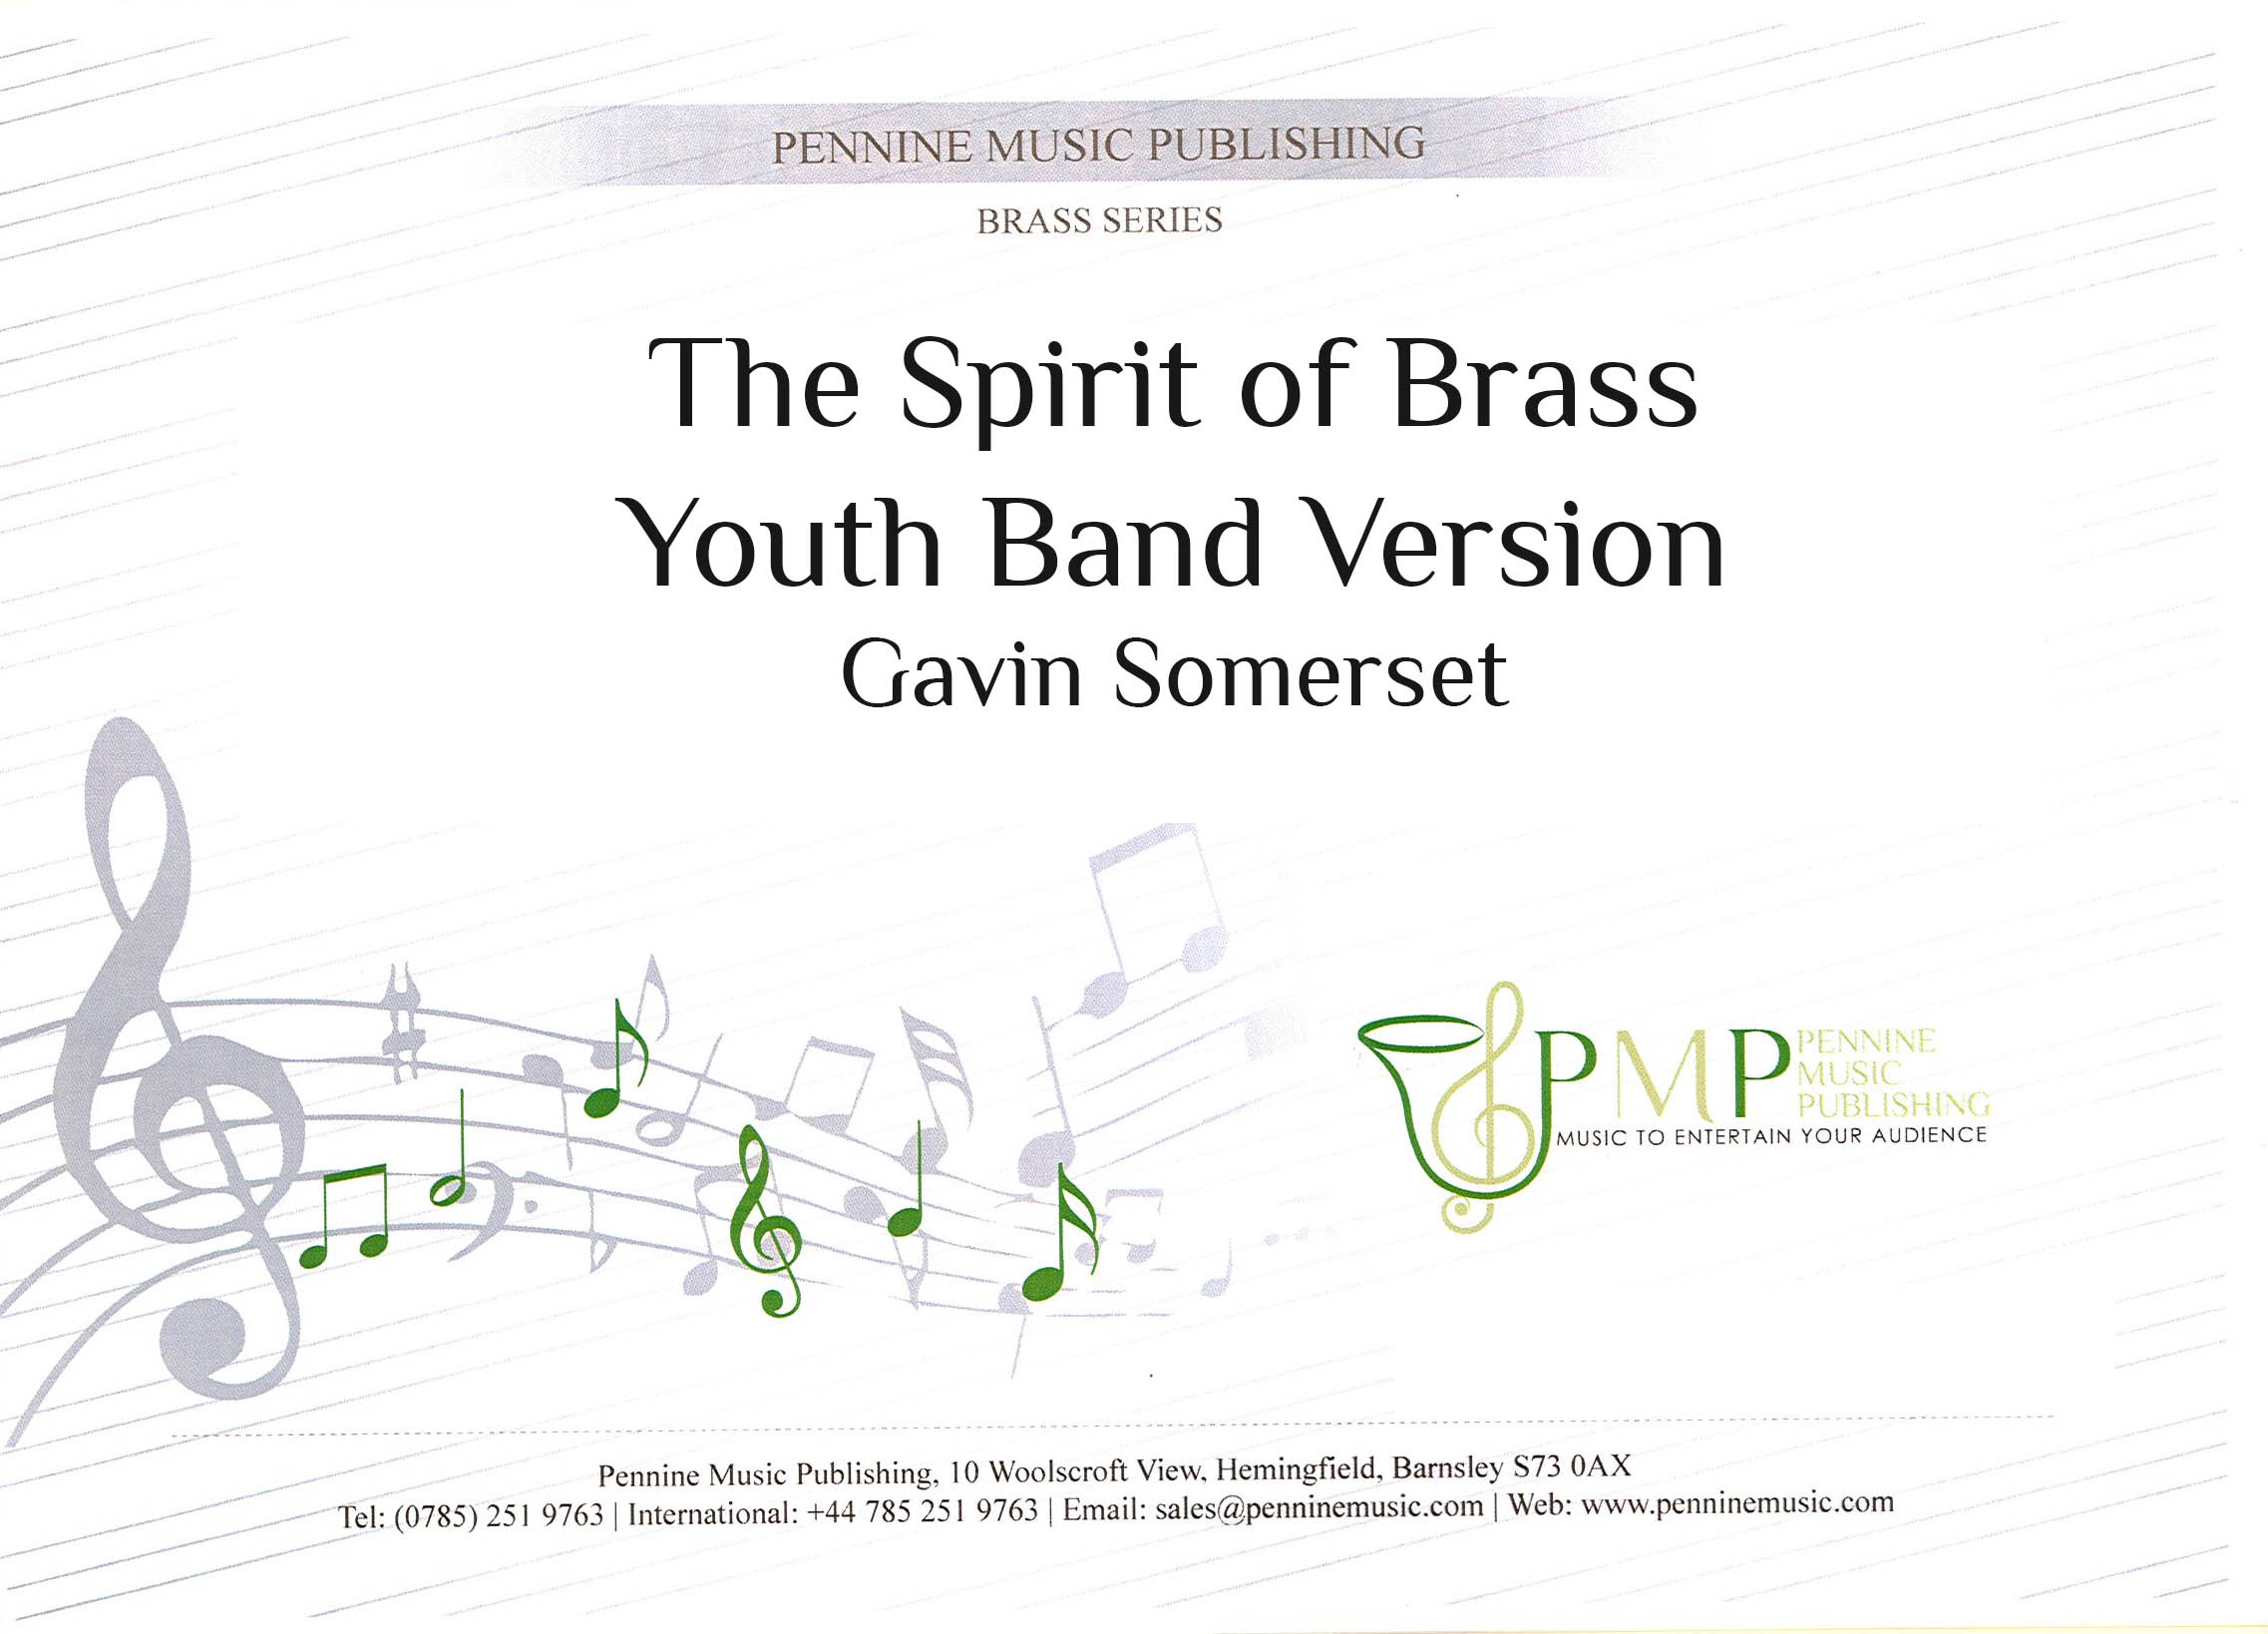 The Spirit of Brass - Youth Band Version